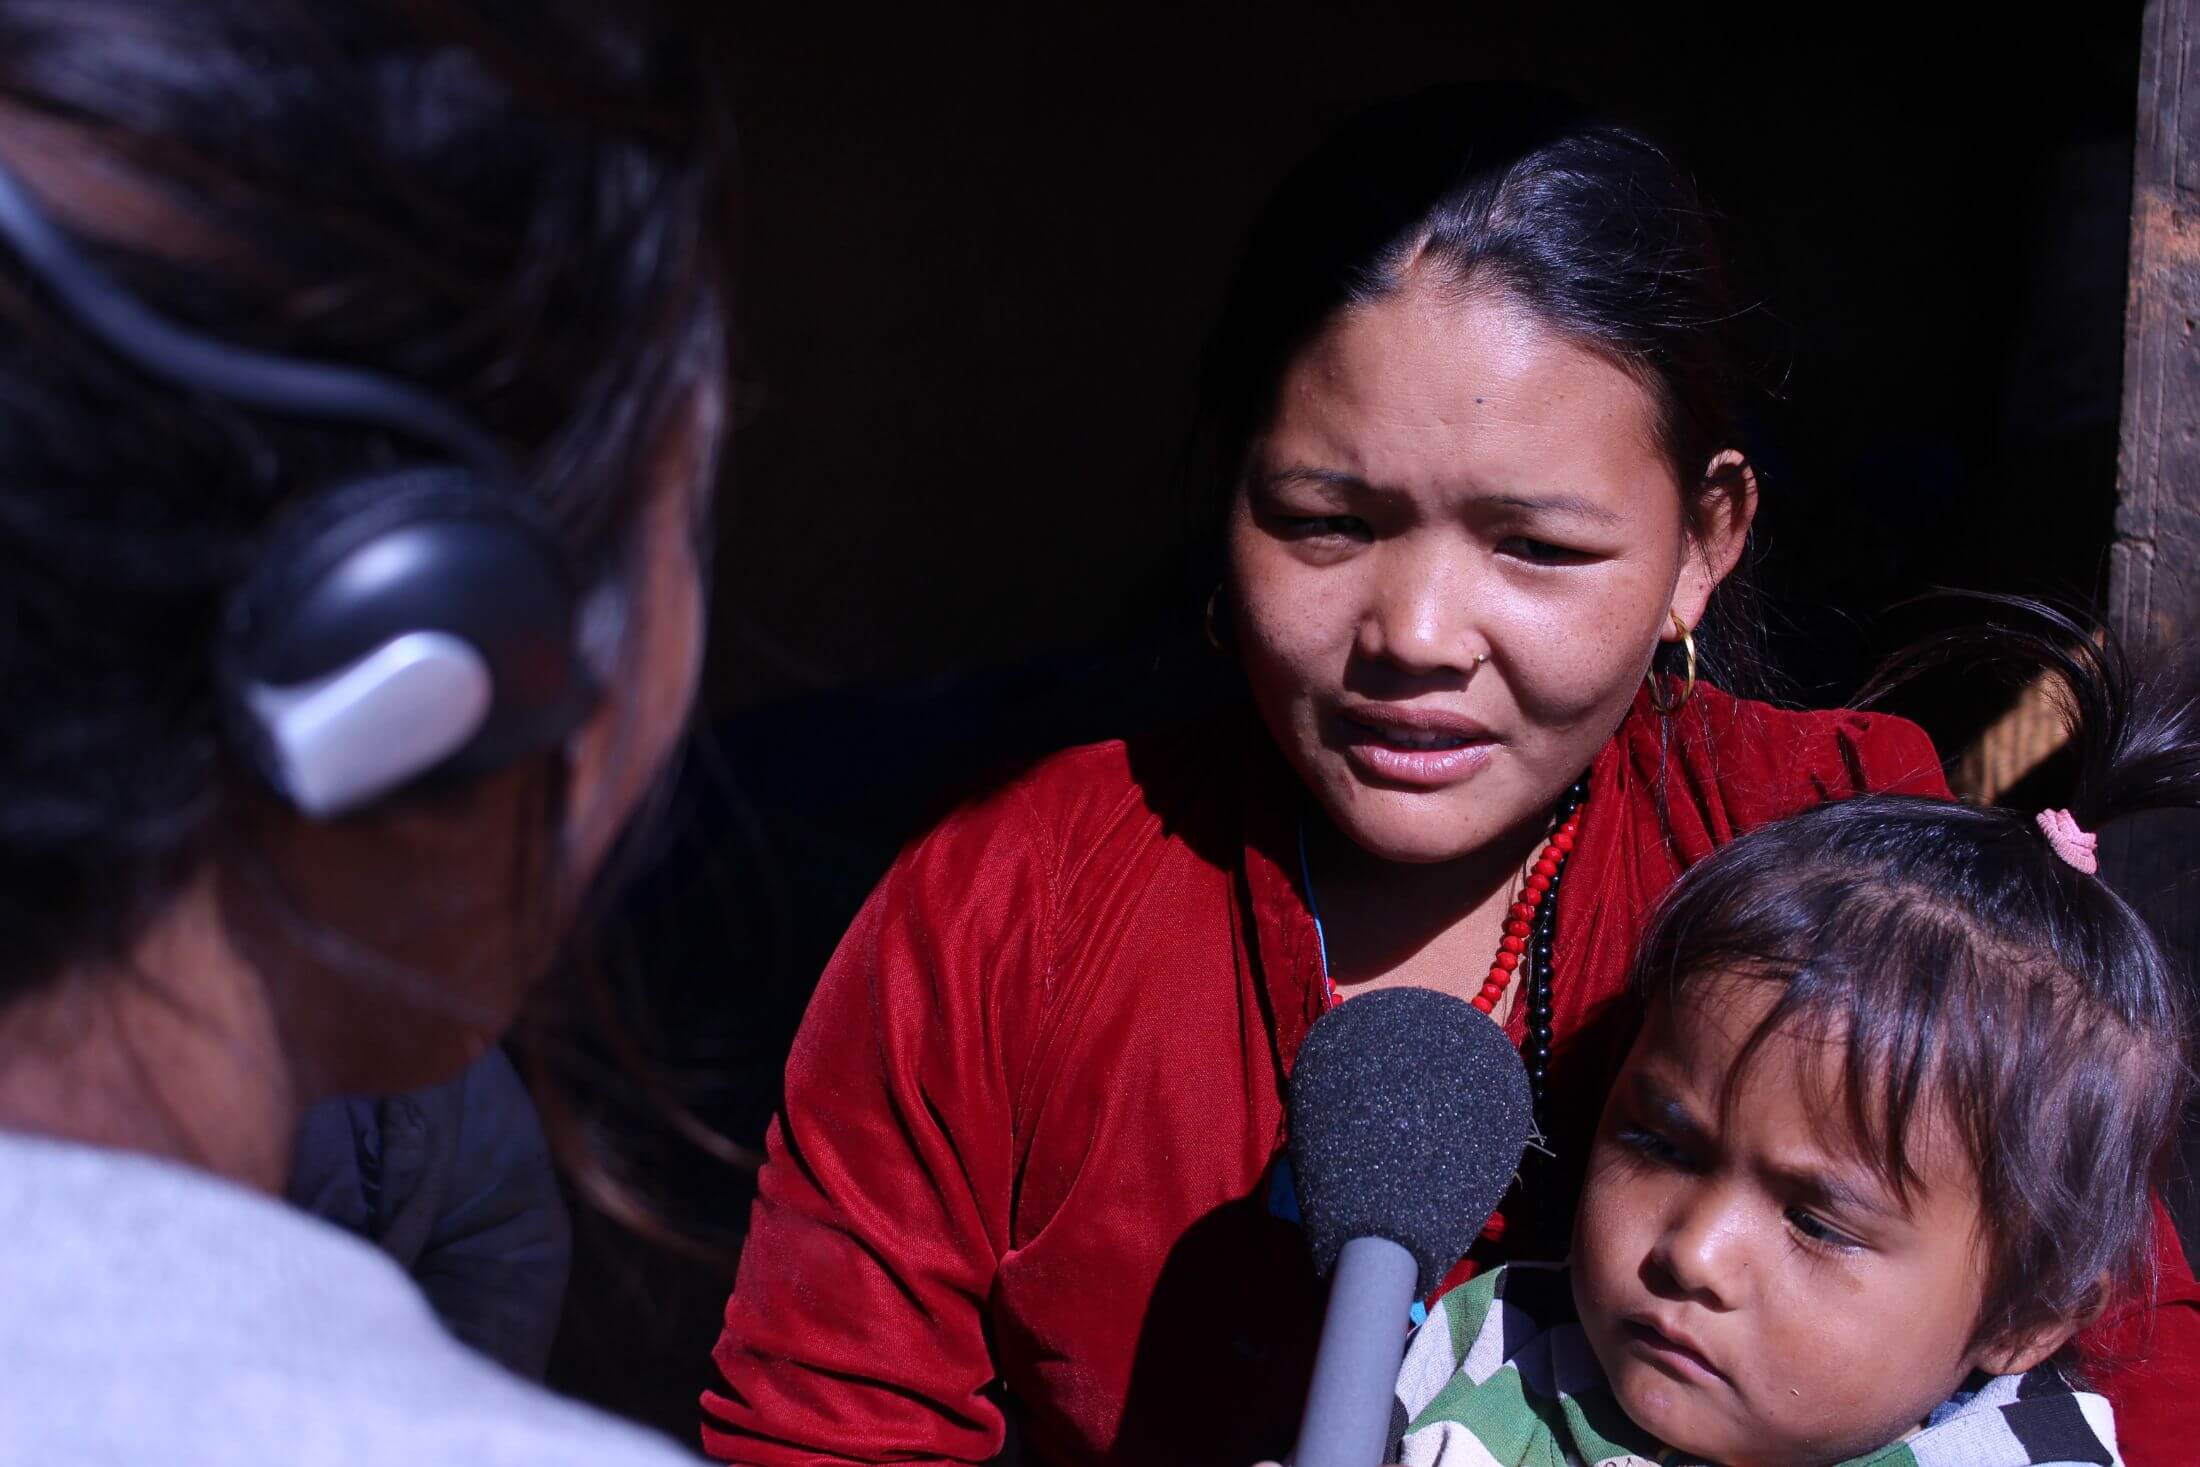 Nepali woman holds a young child speaking into a microphone